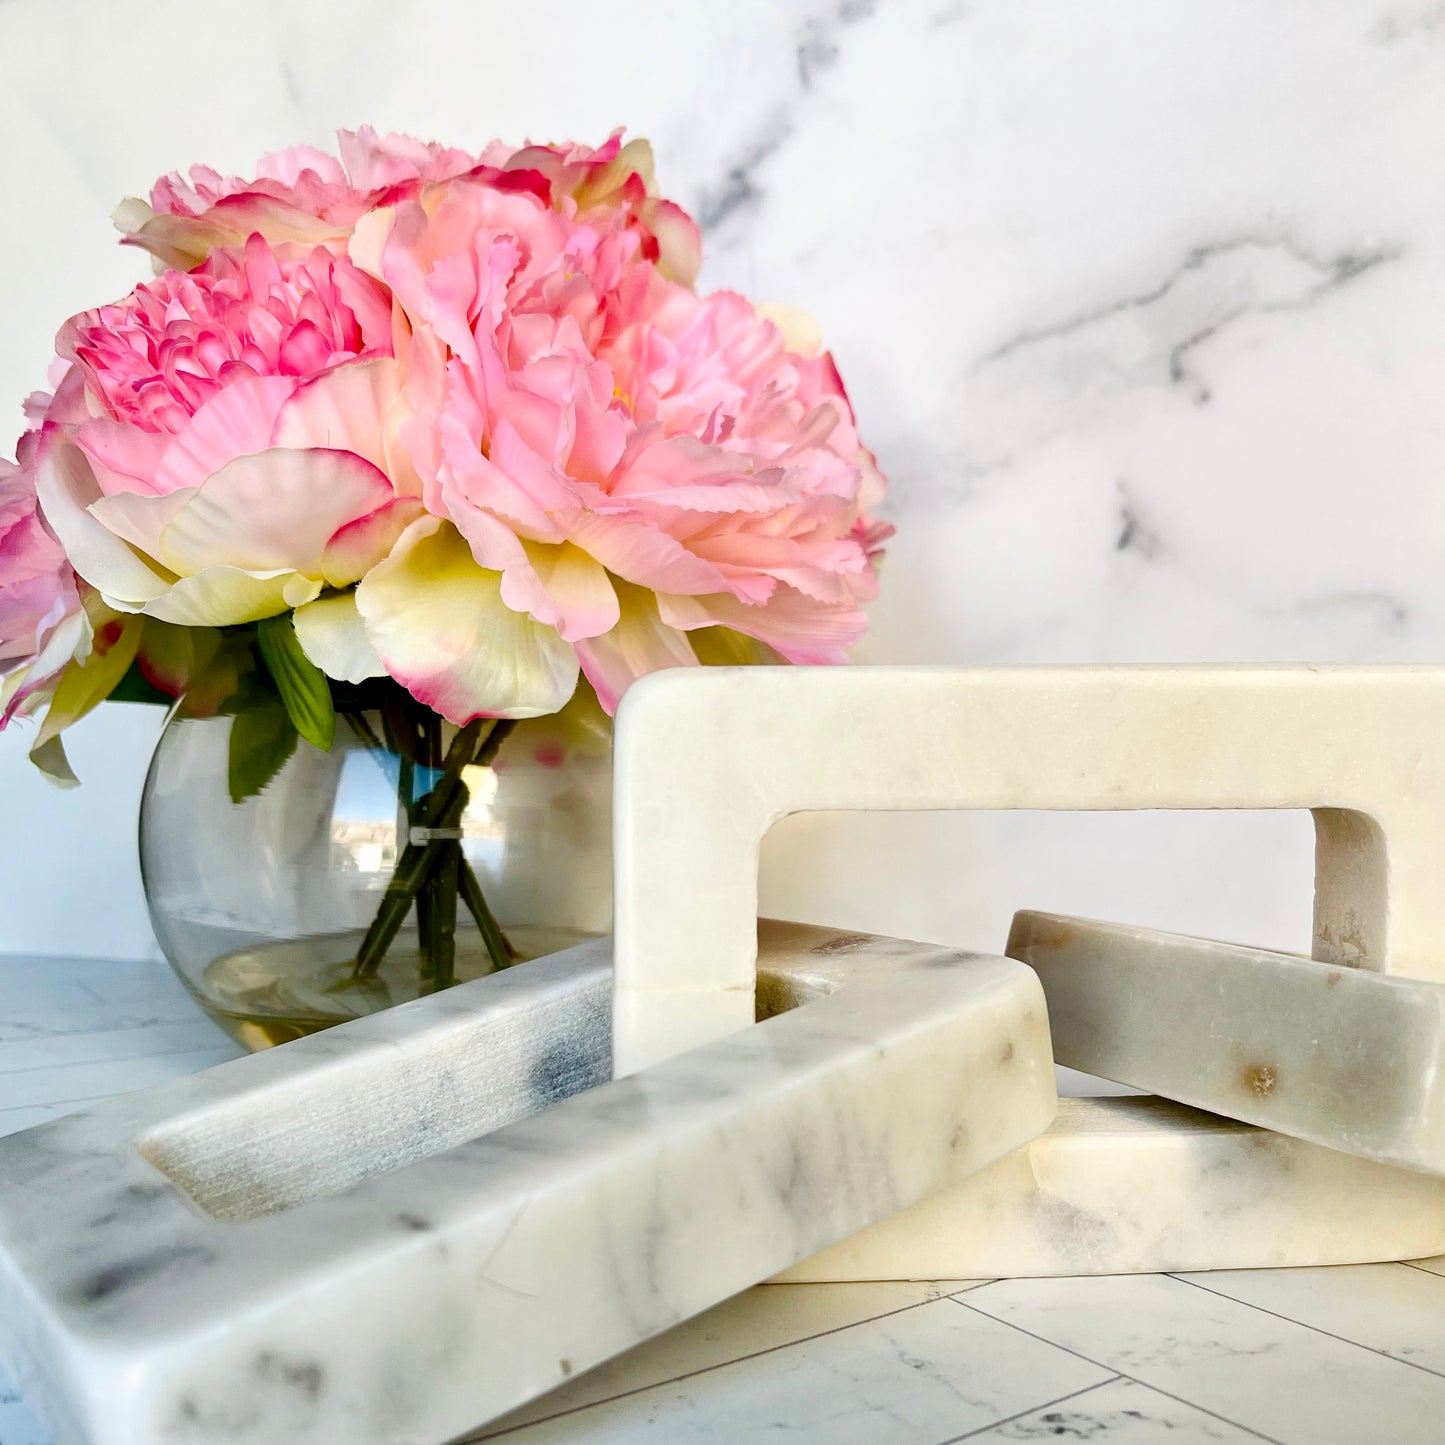 A white marble decor chain with a vase of pink peonies behind it